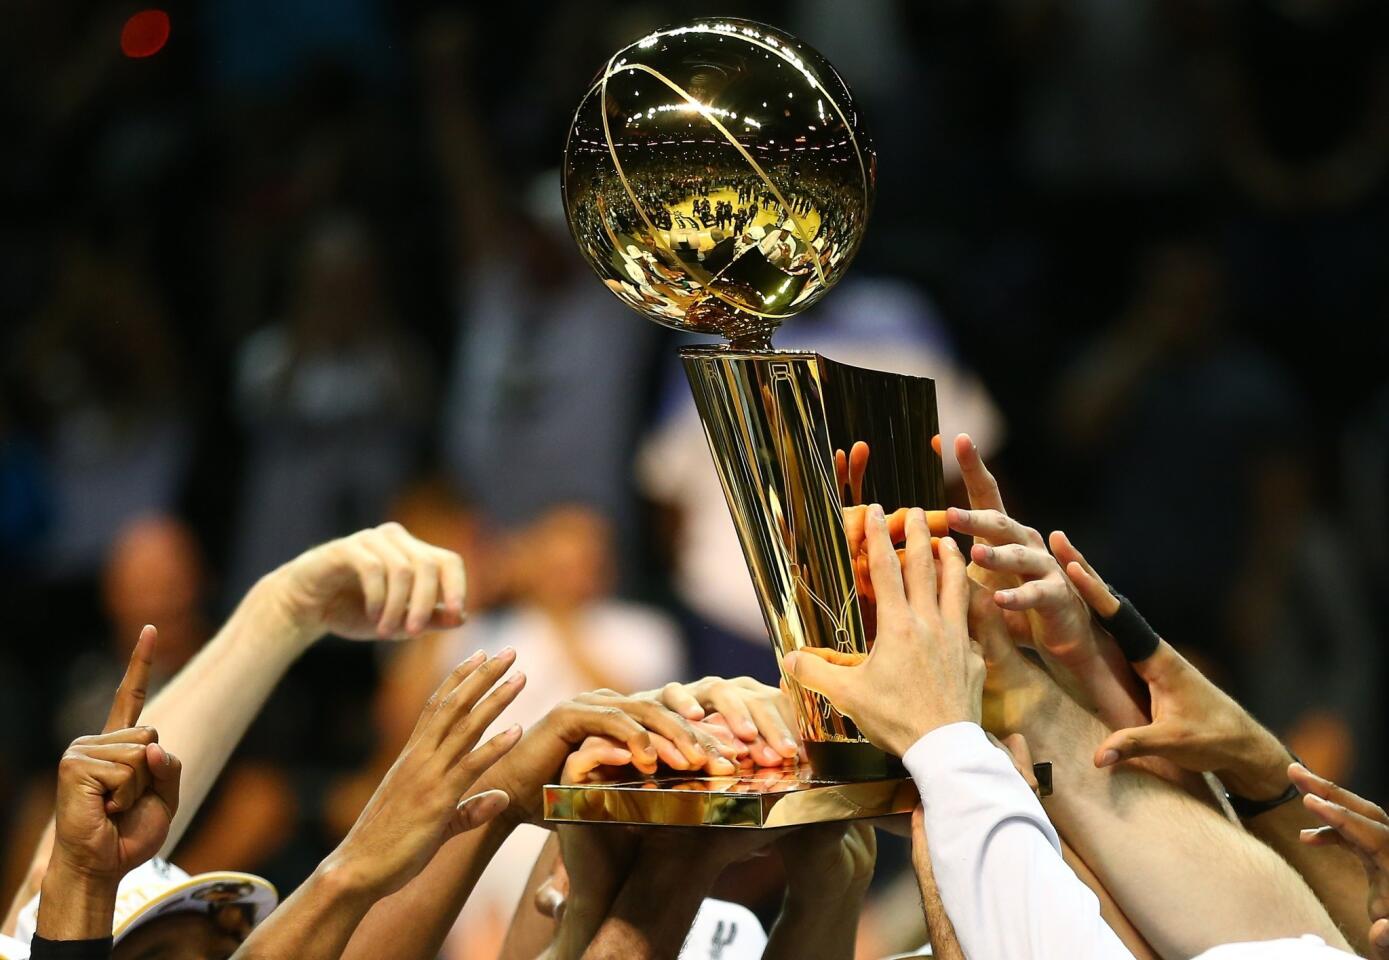 San Antonio Spurs players hold the Larry O'Brien trophy after defeating the Heat, 4-1, in the NBA Finals in June.